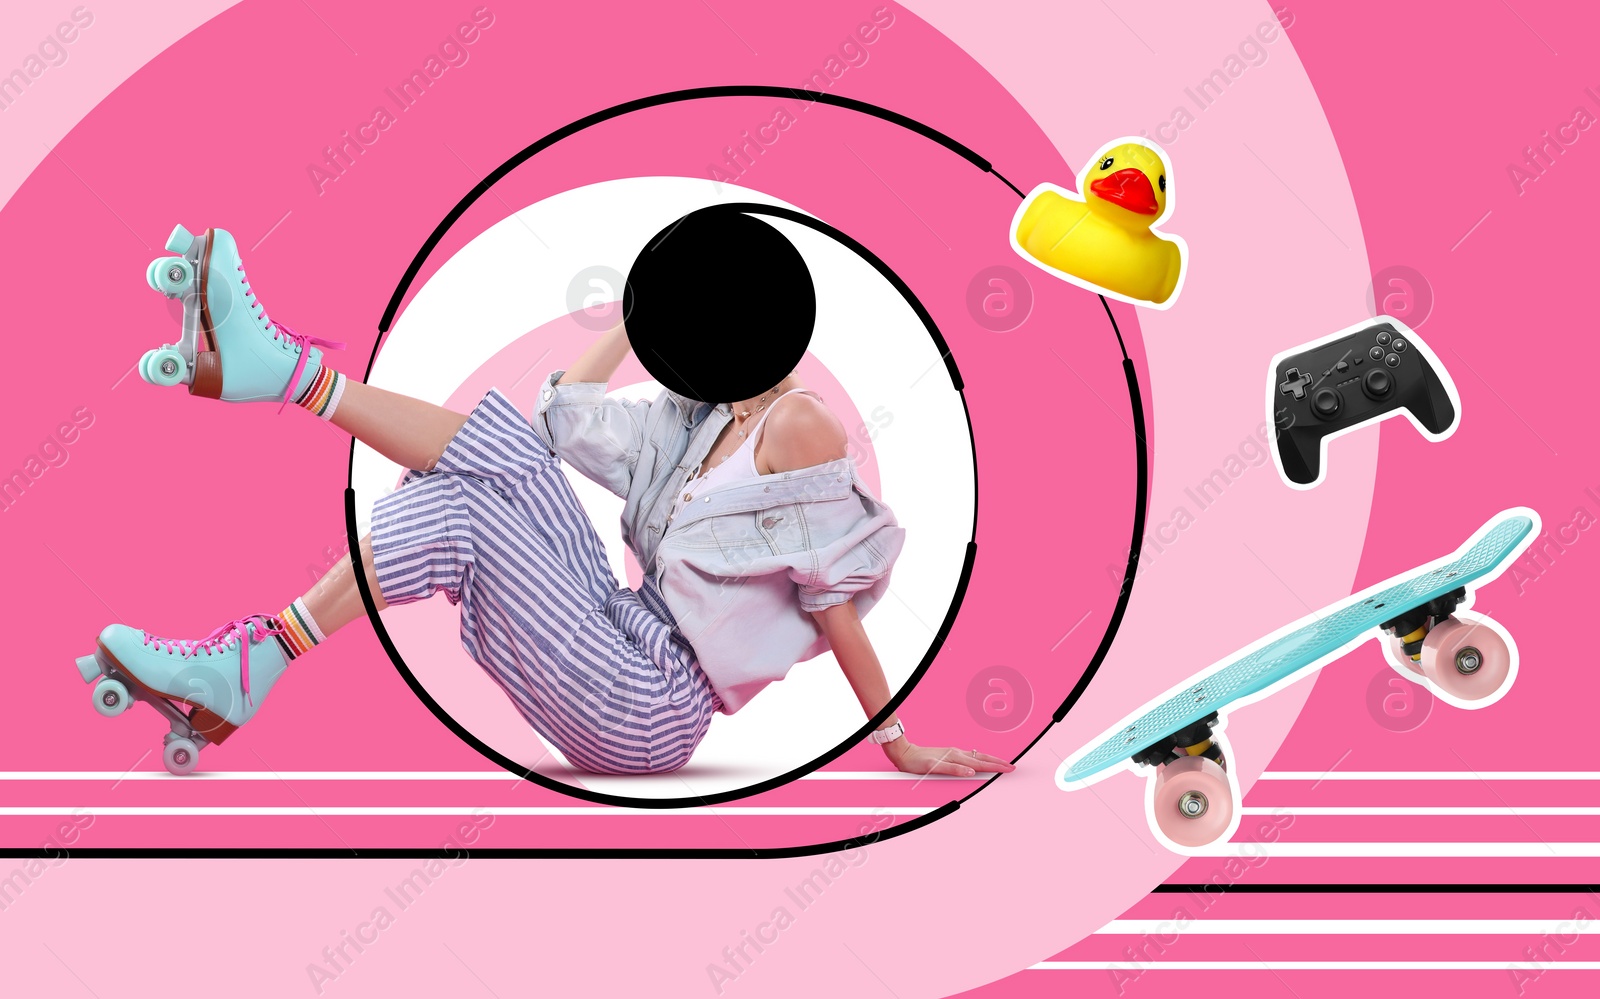 Image of Popular obsessions. Woman with black hole instead of head on color background. Toy duck, gamepad and skateboard flying near